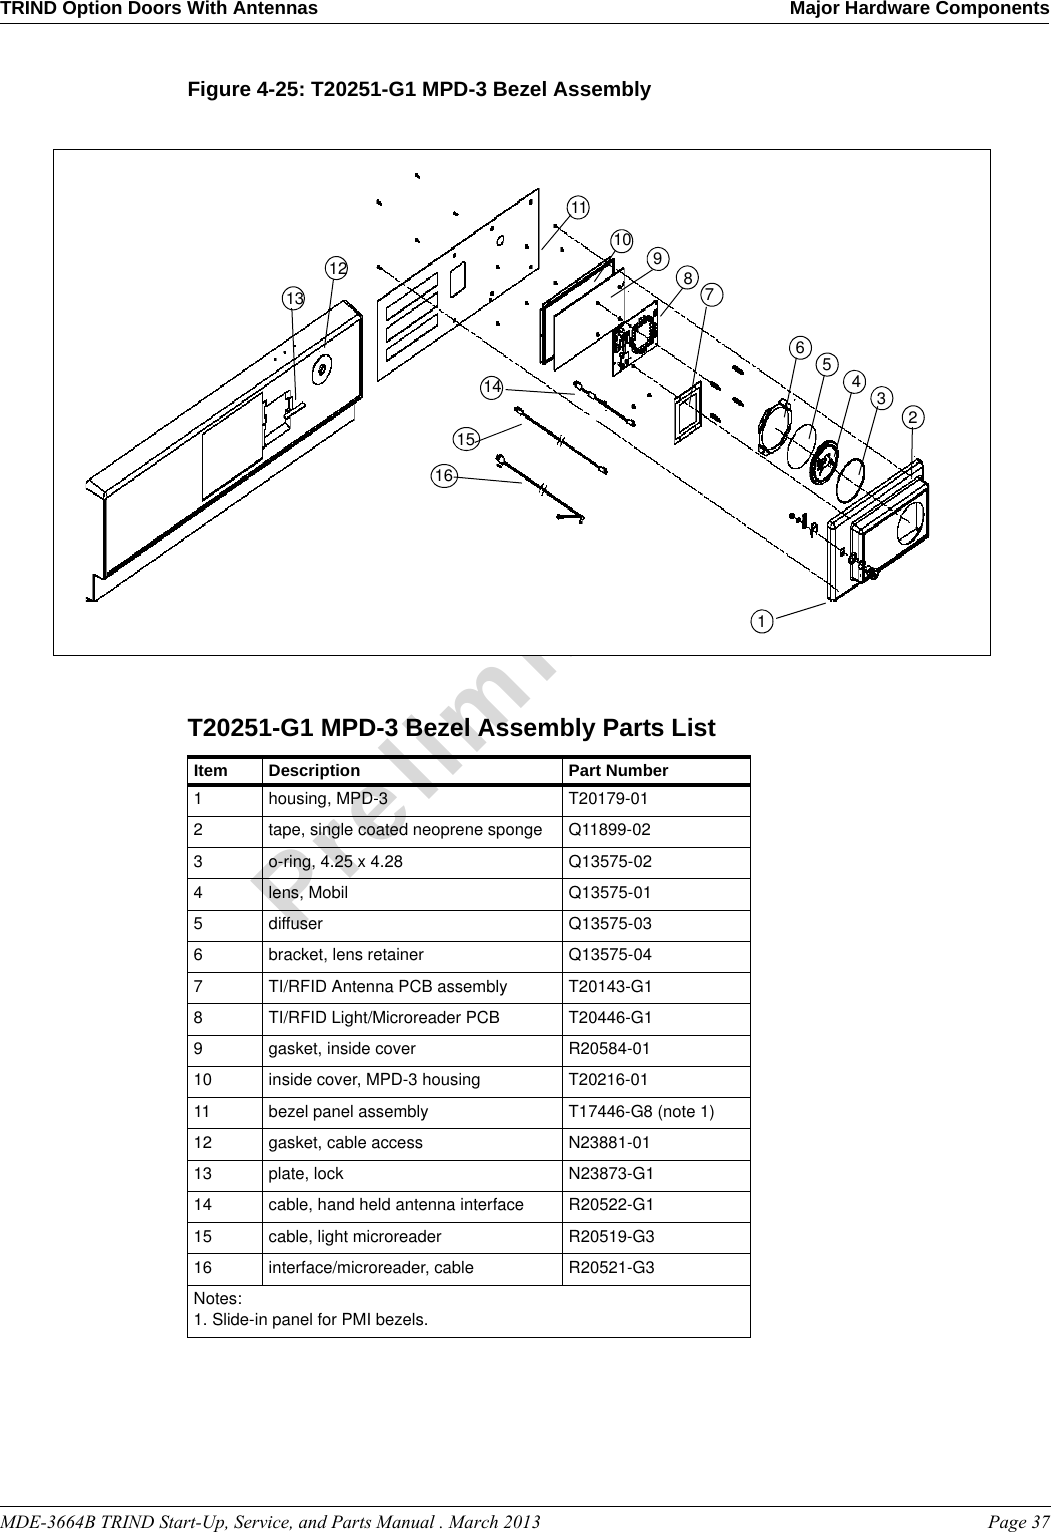 MDE-3664B TRIND Start-Up, Service, and Parts Manual . March 2013 Page 37TRIND Option Doors With Antennas Major Hardware ComponentsPreliminaryFigure 4-25: T20251-G1 MPD-3 Bezel Assembly612543971411121513 81016T20251-G1 MPD-3 Bezel Assembly Parts List Item Description Part Number1housing, MPD-3 T20179-012tape, single coated neoprene sponge Q11899-023o-ring, 4.25 x 4.28 Q13575-024lens, Mobil Q13575-015diffuser Q13575-036bracket, lens retainer Q13575-047TI/RFID Antenna PCB assembly T20143-G18TI/RFID Light/Microreader PCB T20446-G19gasket, inside cover R20584-0110 inside cover, MPD-3 housing T20216-0111 bezel panel assembly T17446-G8 (note 1)12 gasket, cable access N23881-0113 plate, lock N23873-G114 cable, hand held antenna interface R20522-G115 cable, light microreader R20519-G316 interface/microreader, cable R20521-G3Notes:1. Slide-in panel for PMI bezels.